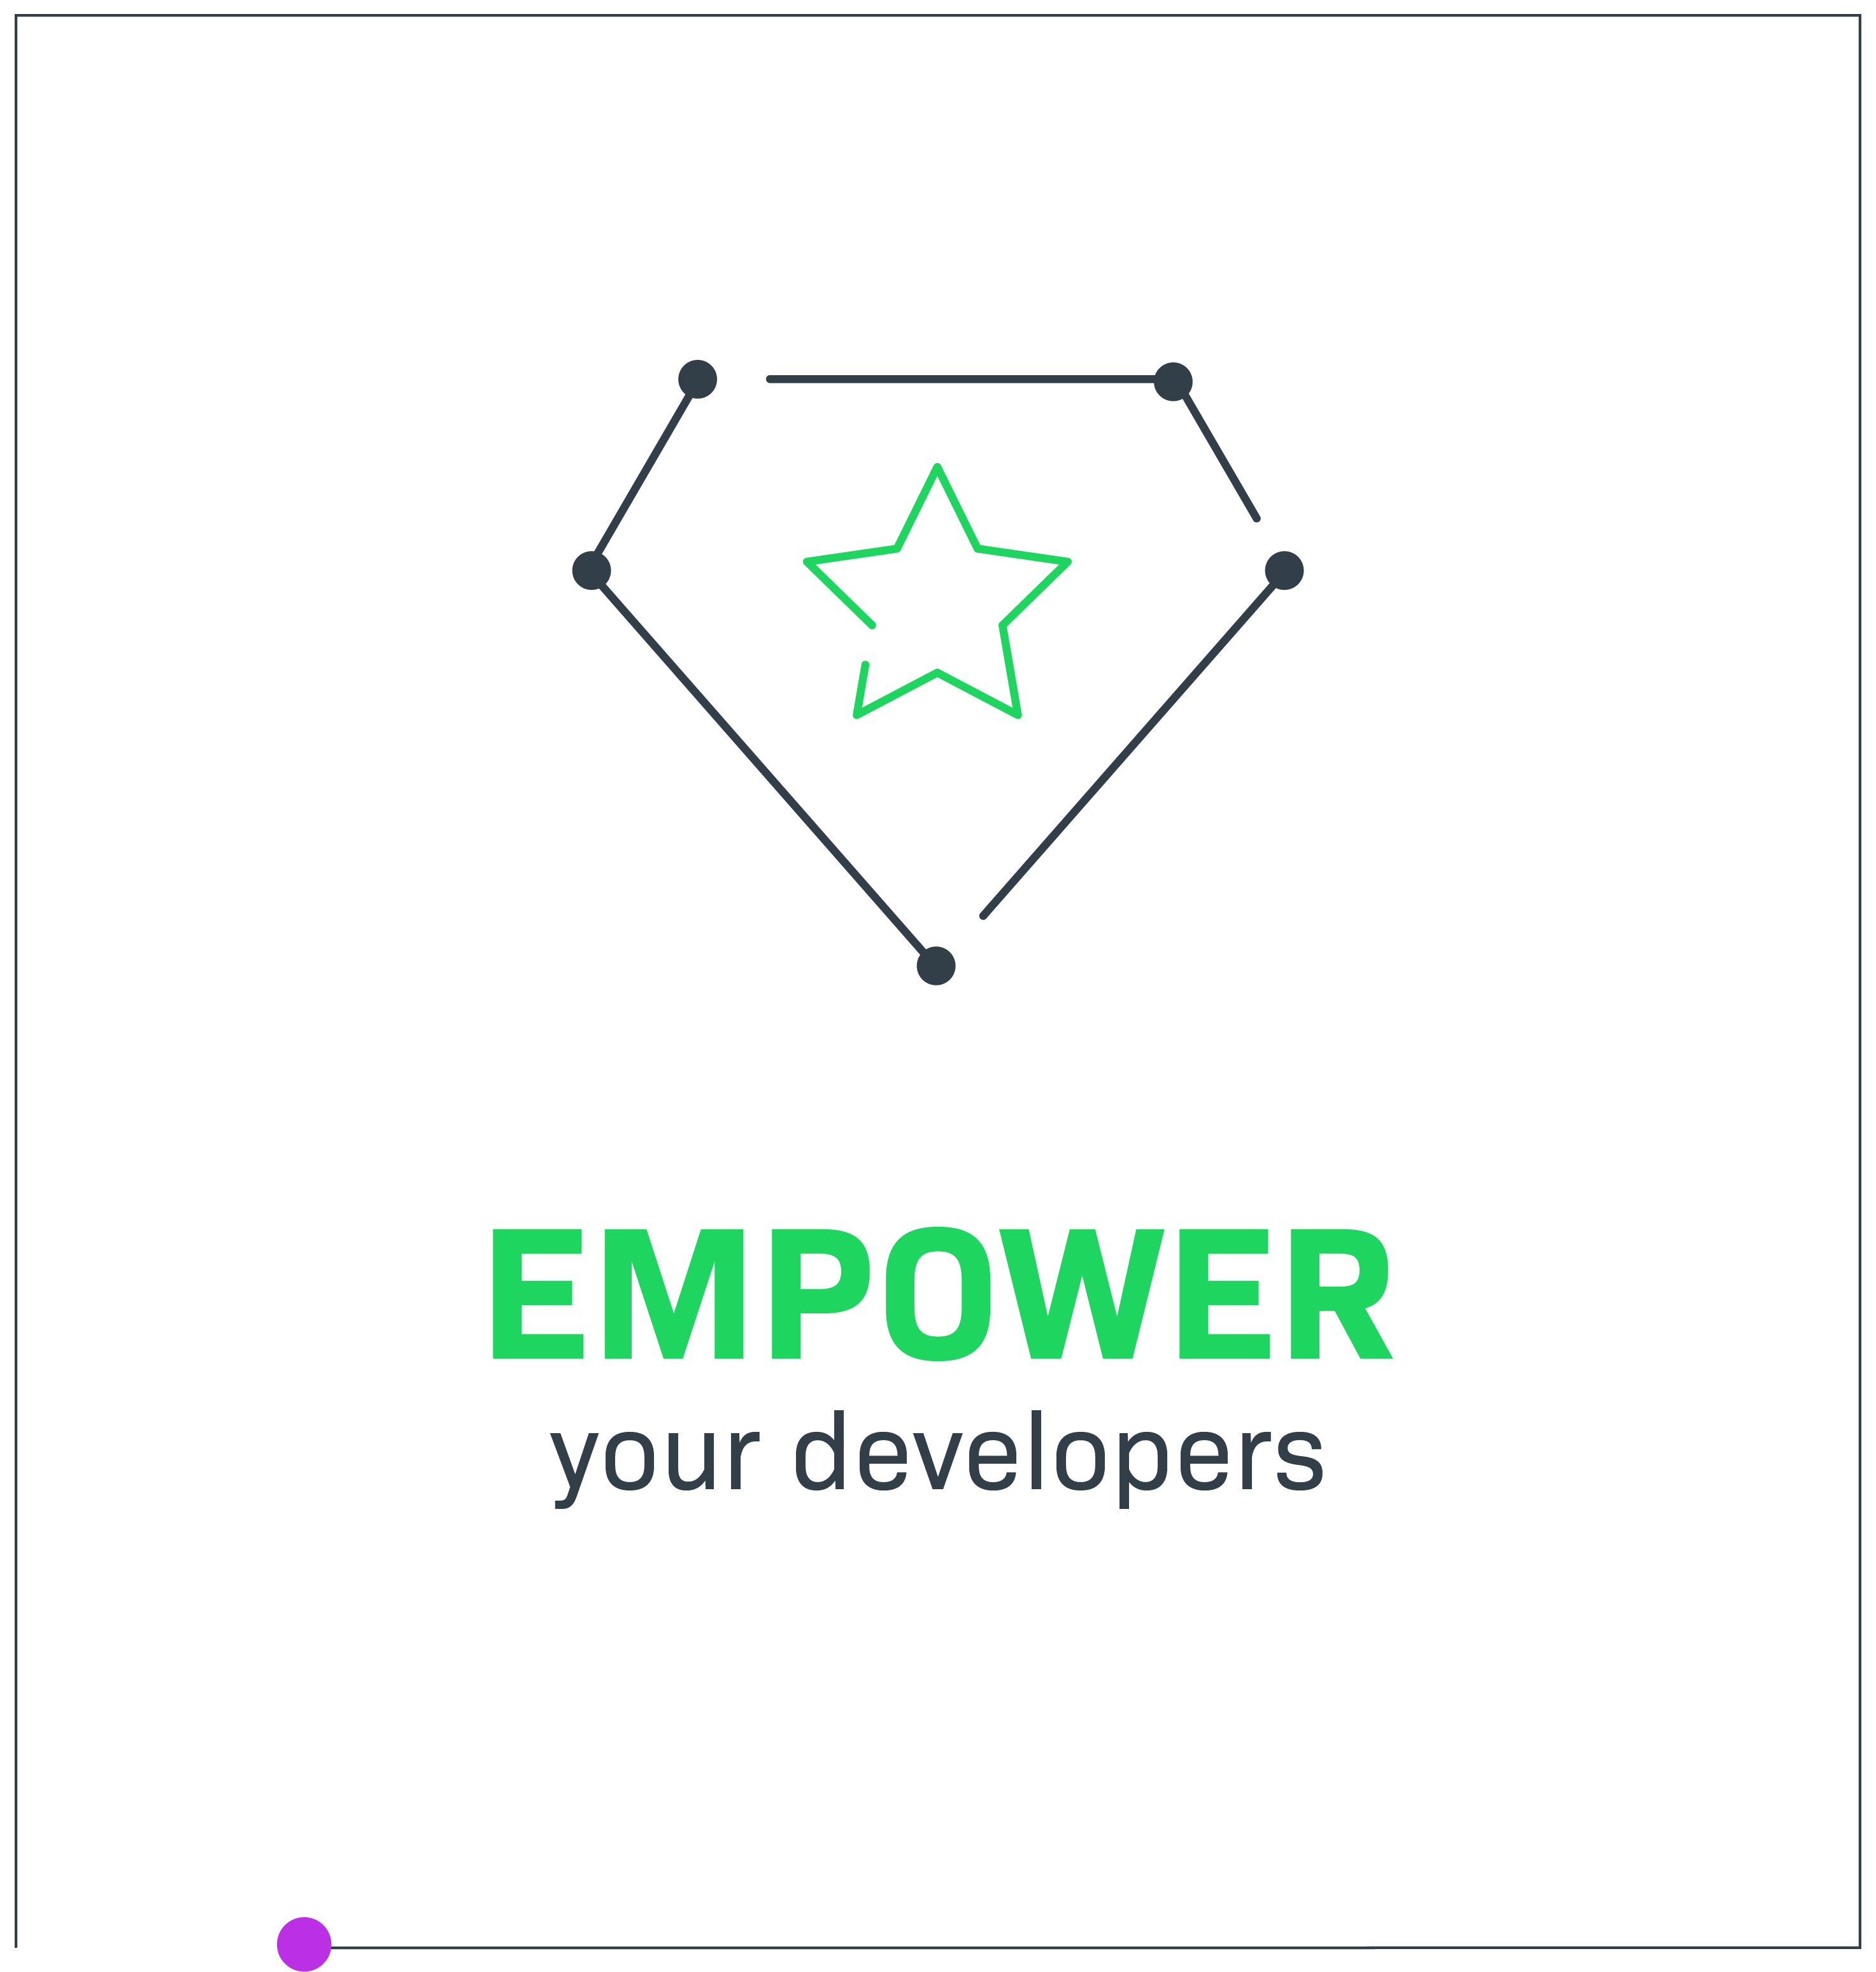 Empower your developers